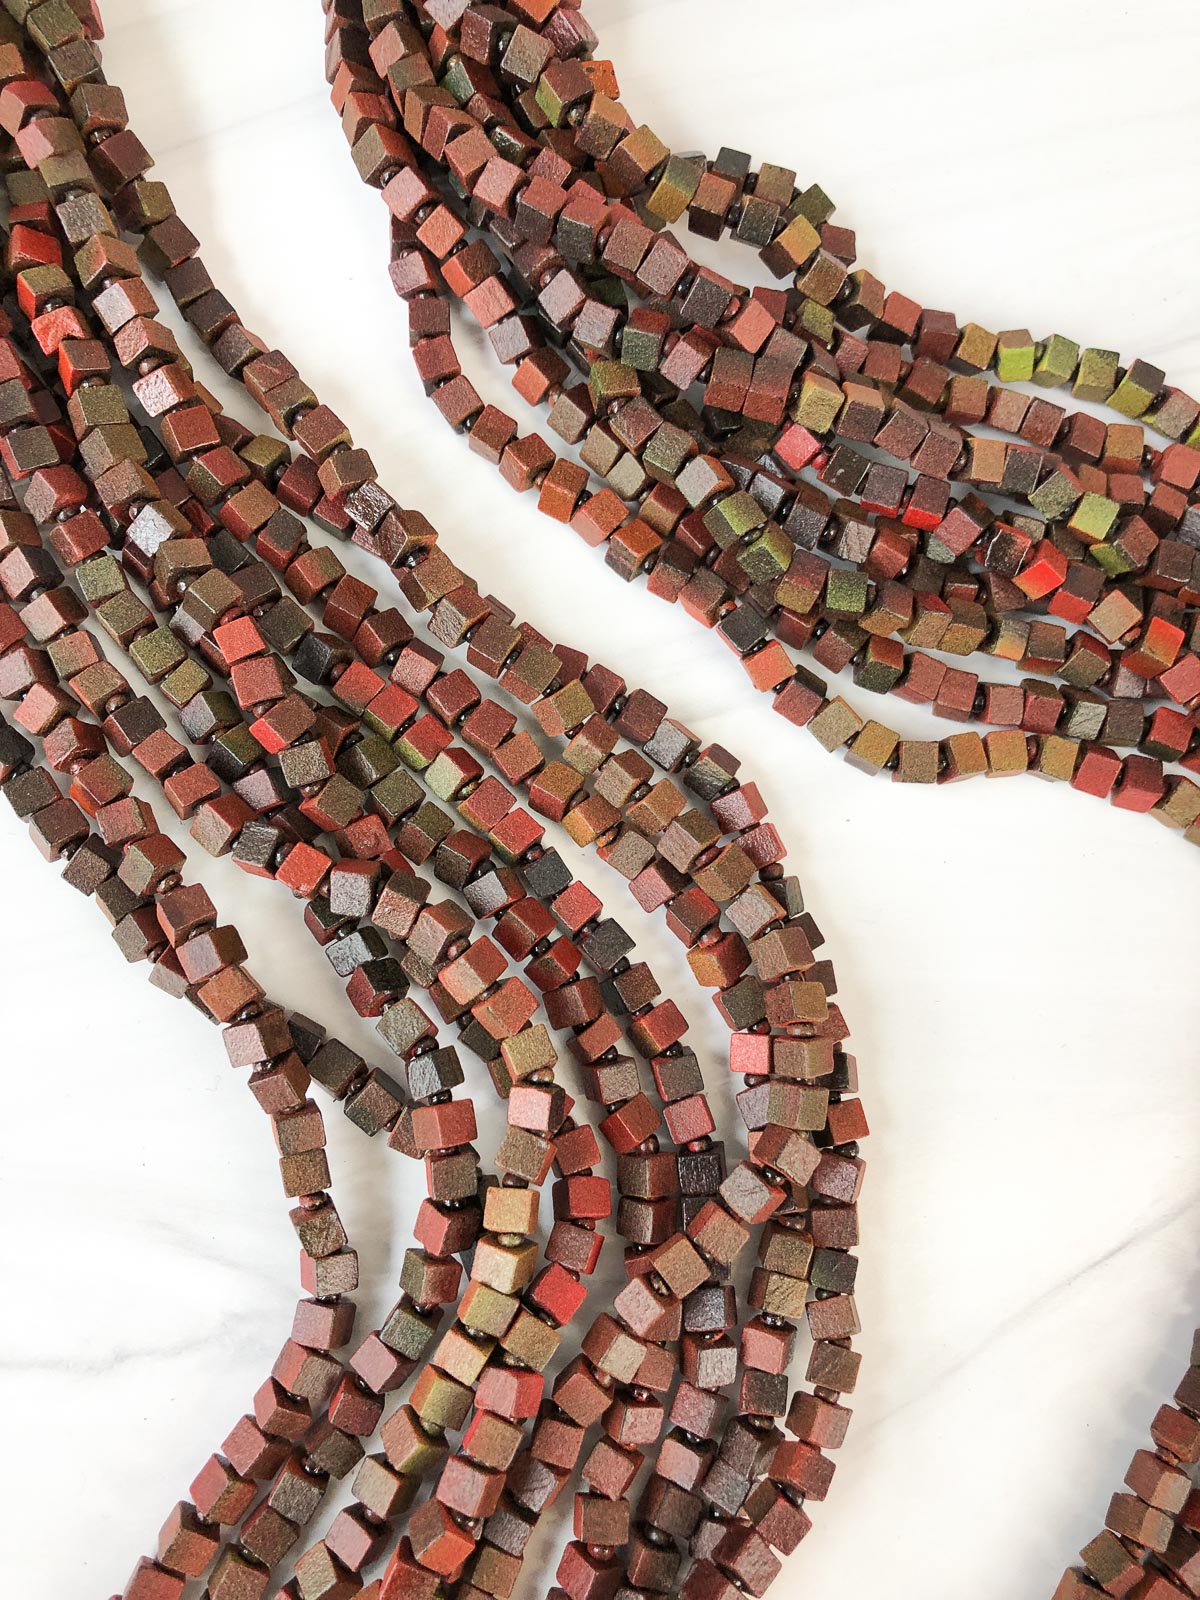 Jianhui London Hand Painted The Next Pashmina Beaded Necklace, Wine/Green - Statement Boutique